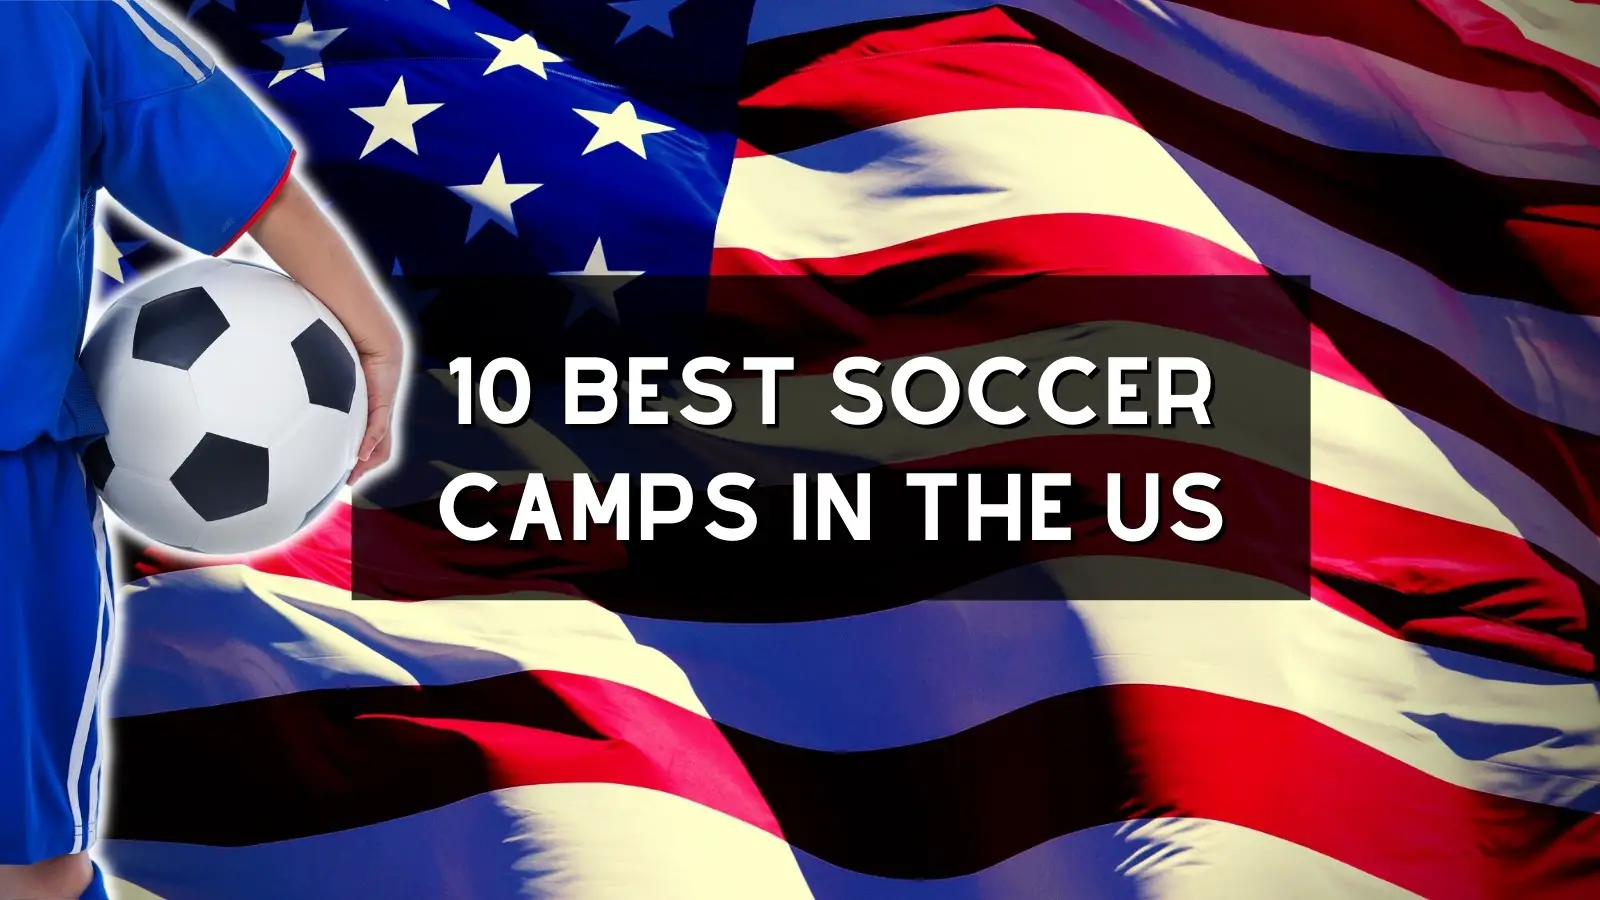 10 Best Soccer Camps In The US – (2022) Guide